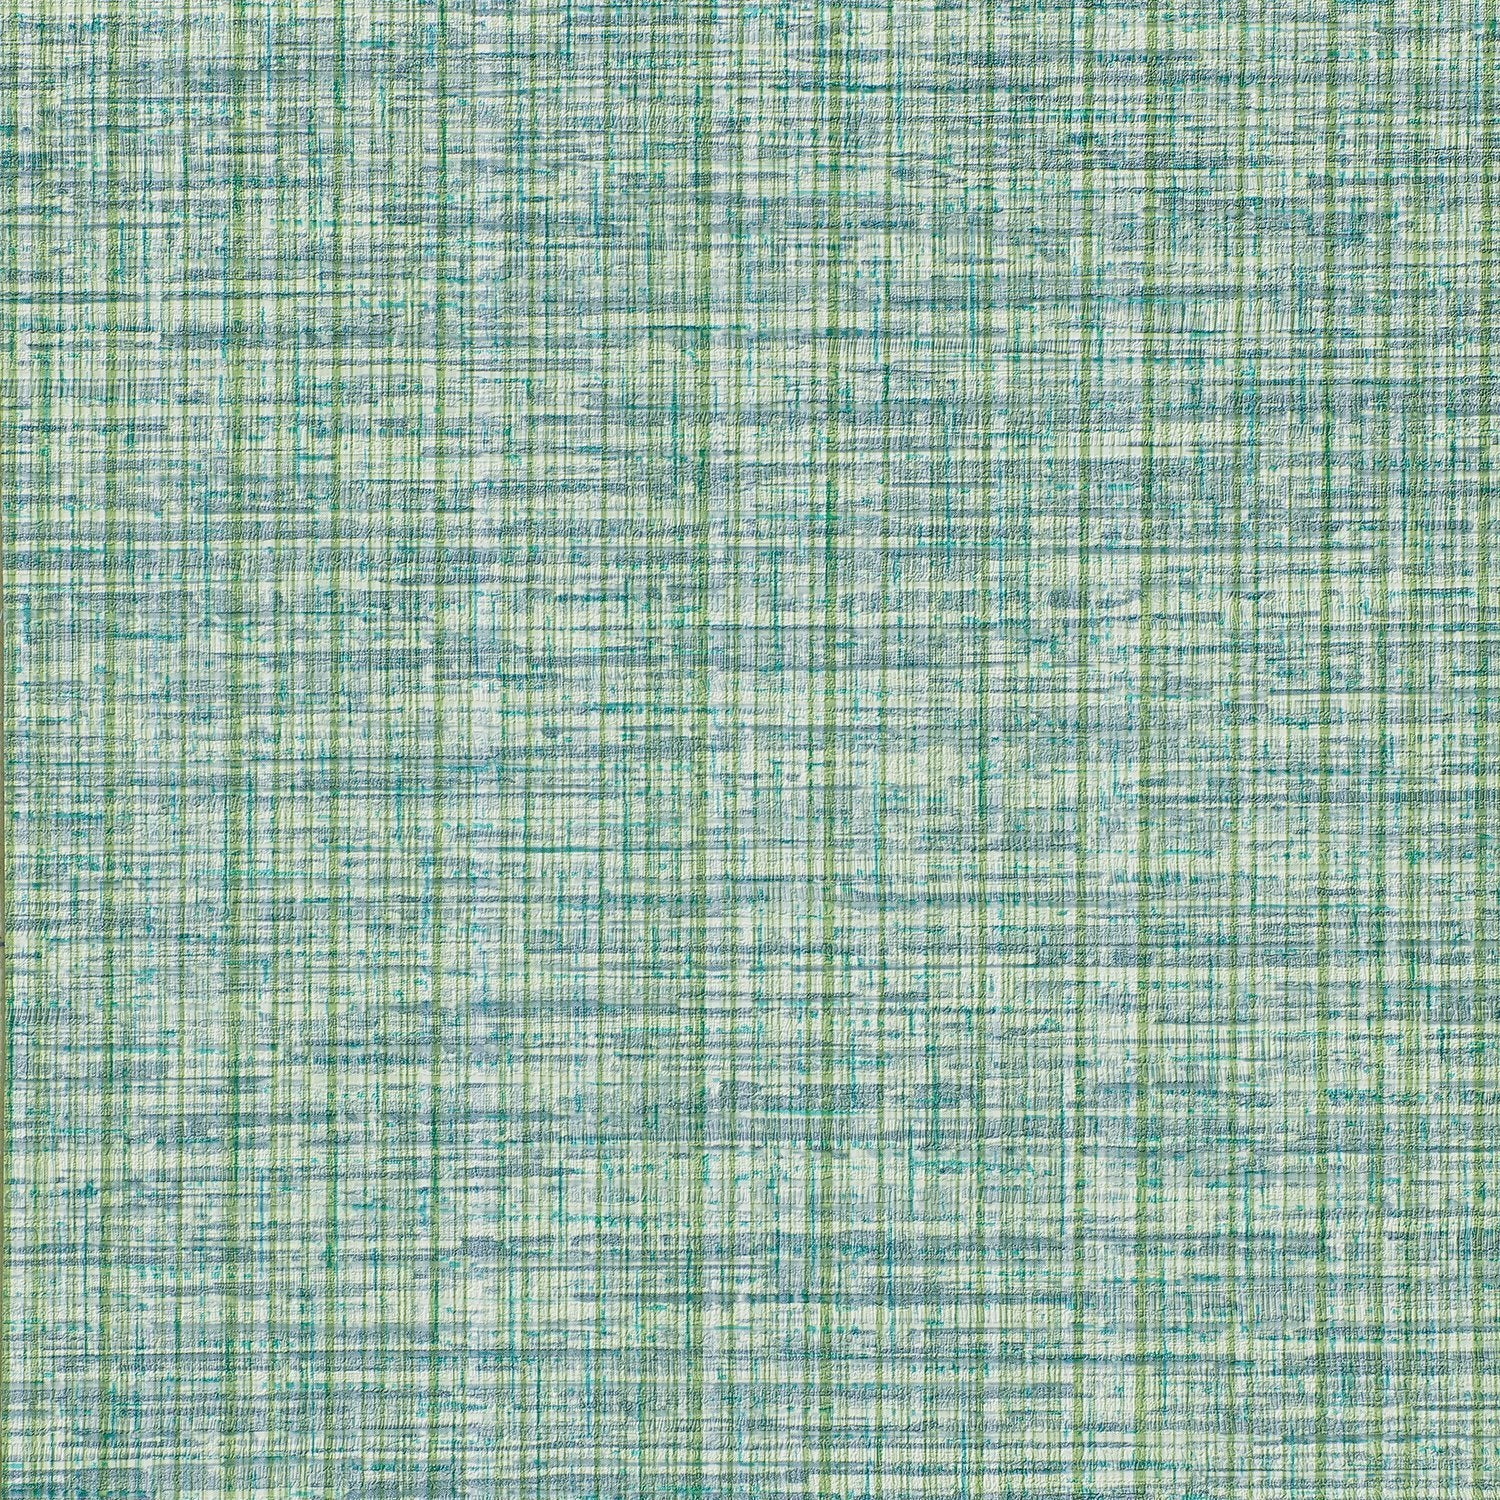 Bobbin' Weave - Y47775 Teal Tint - Wallcovering - Vycon - Kube Contract